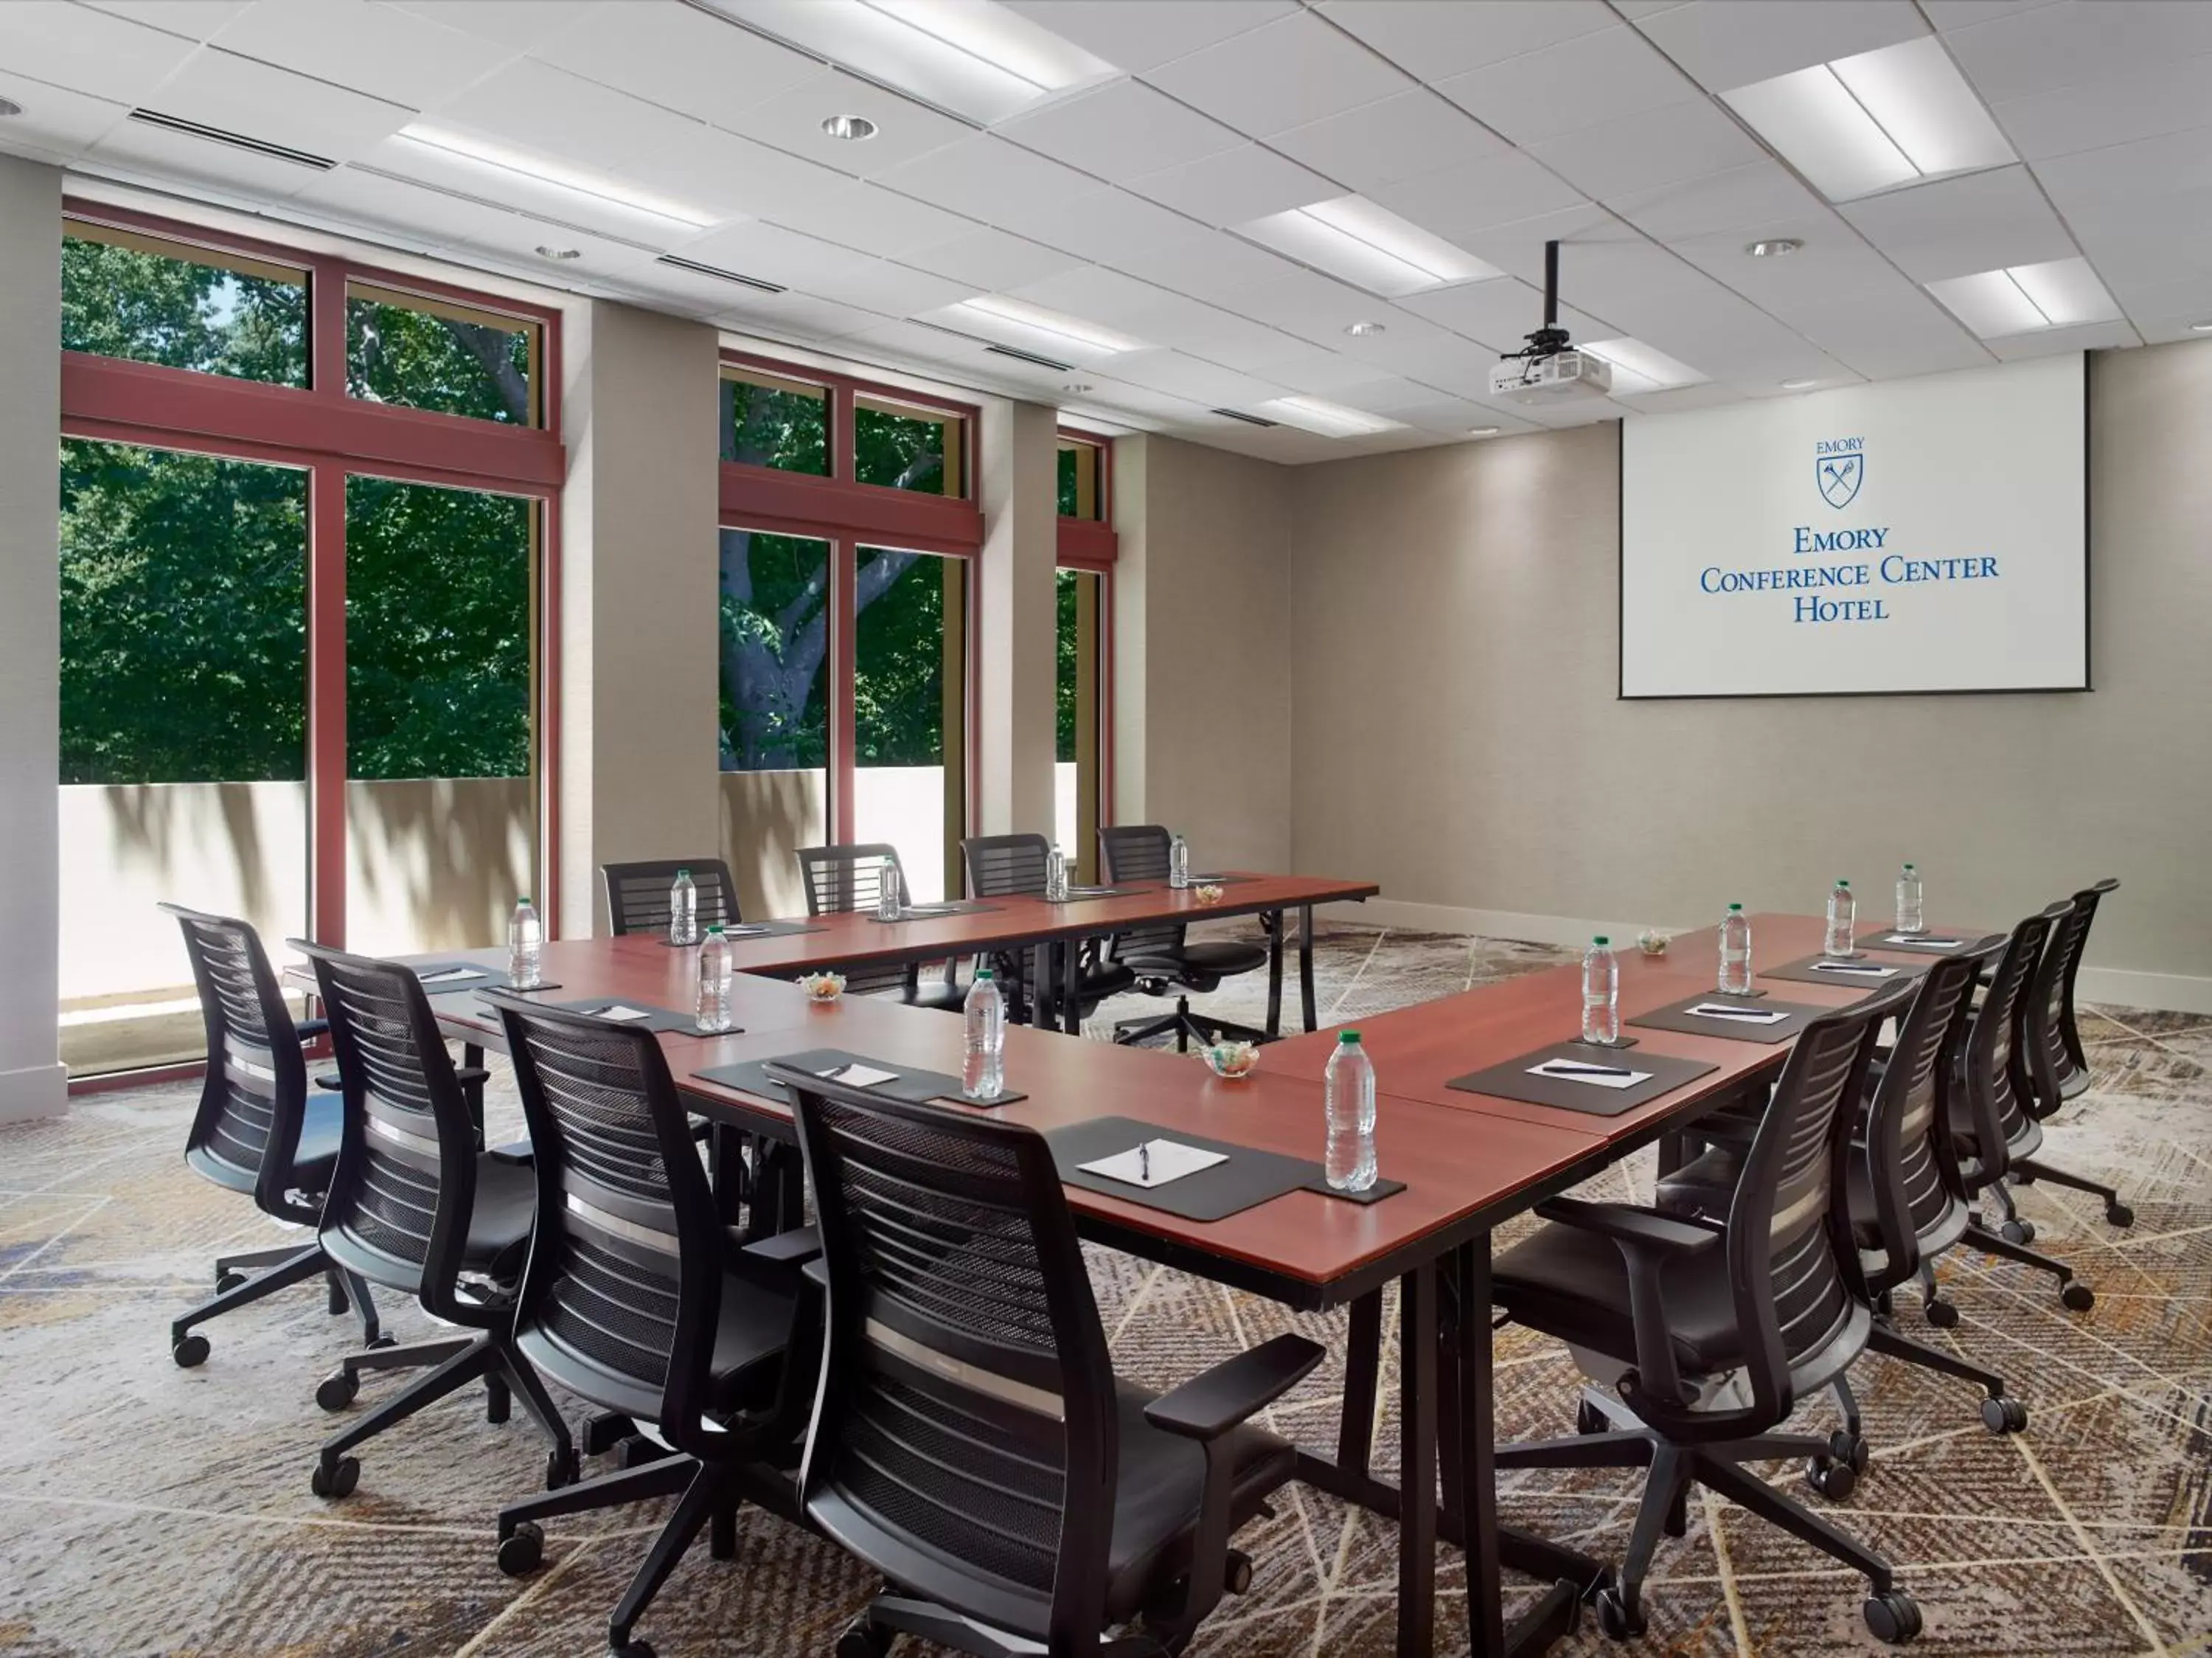 Meeting/conference room in Emory Conference Center Hotel